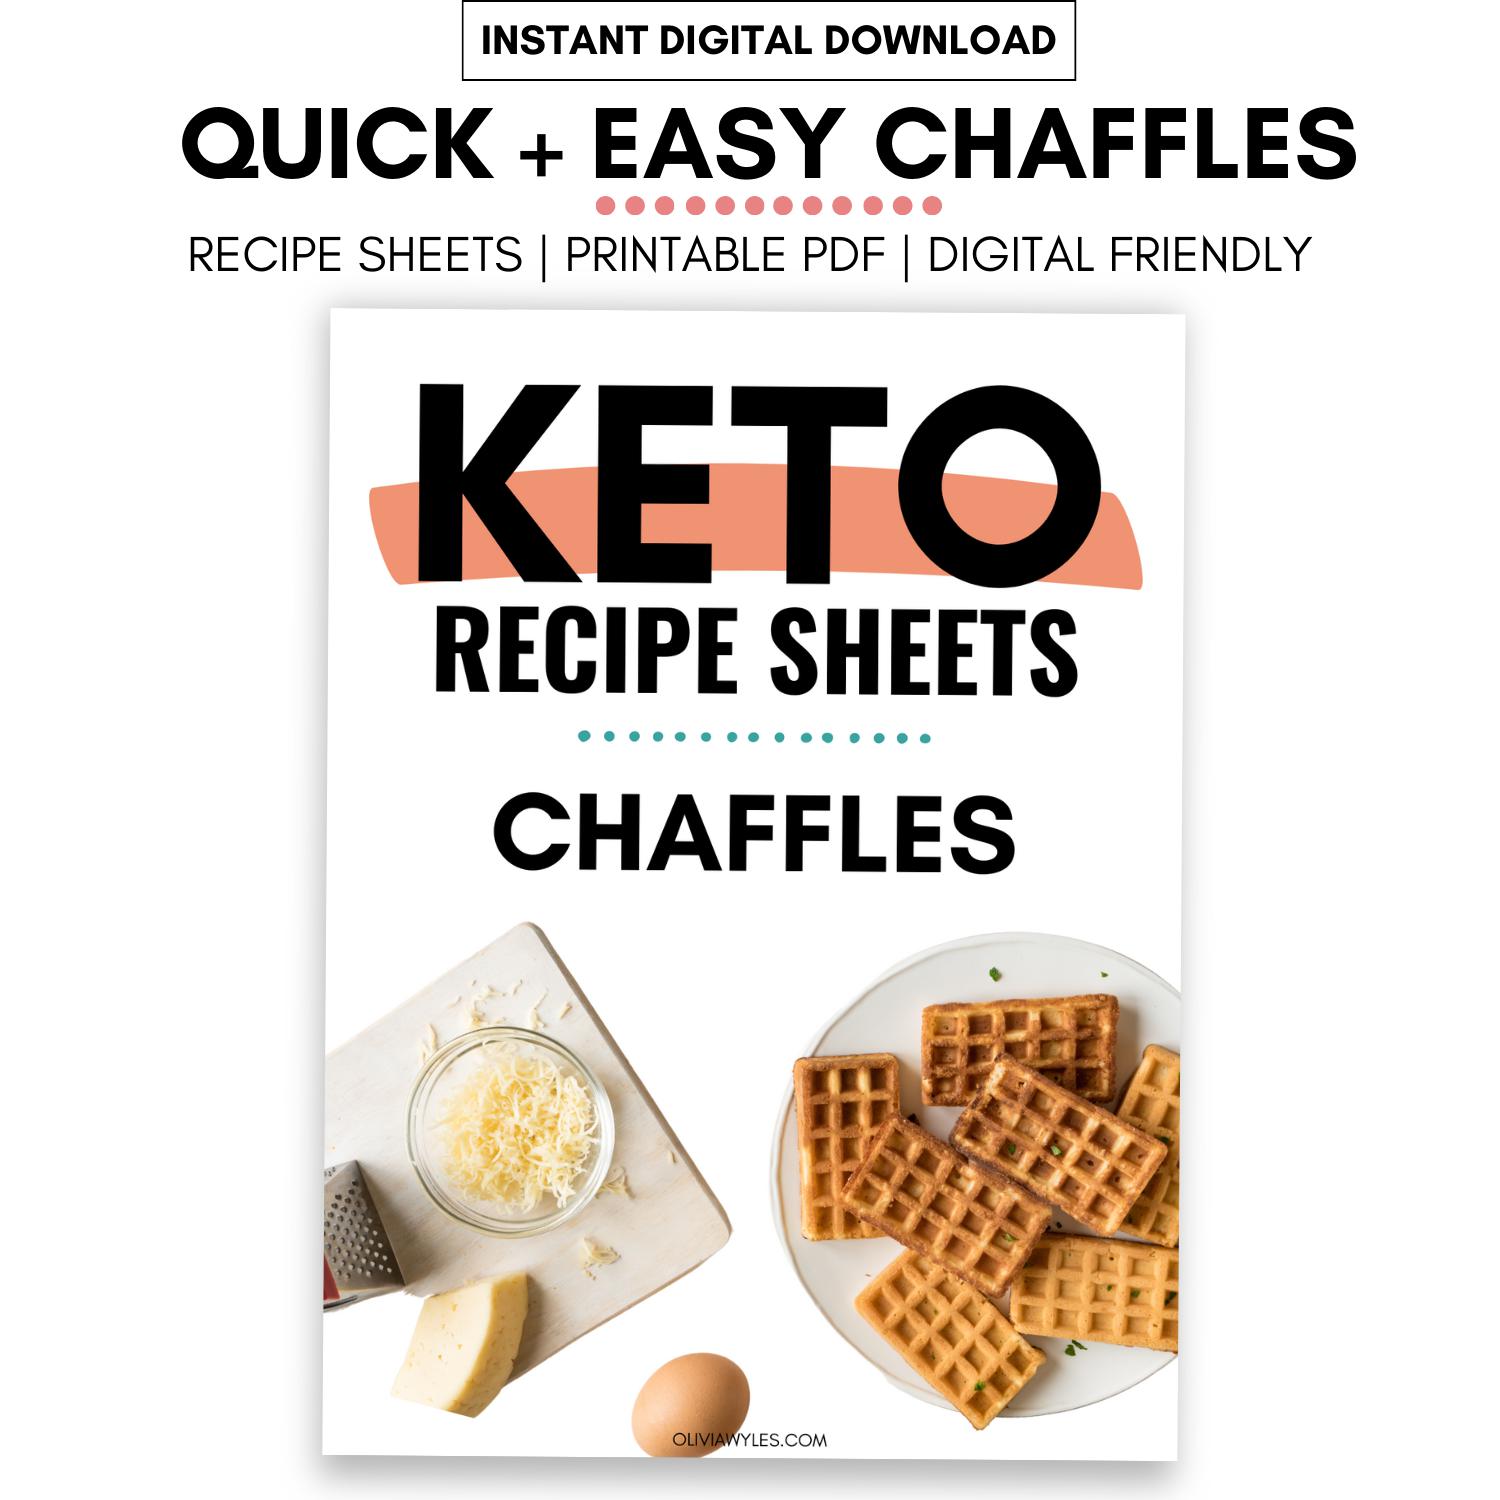 21 Chaffle Recipes That Will Change Your Life Forever - Olivia